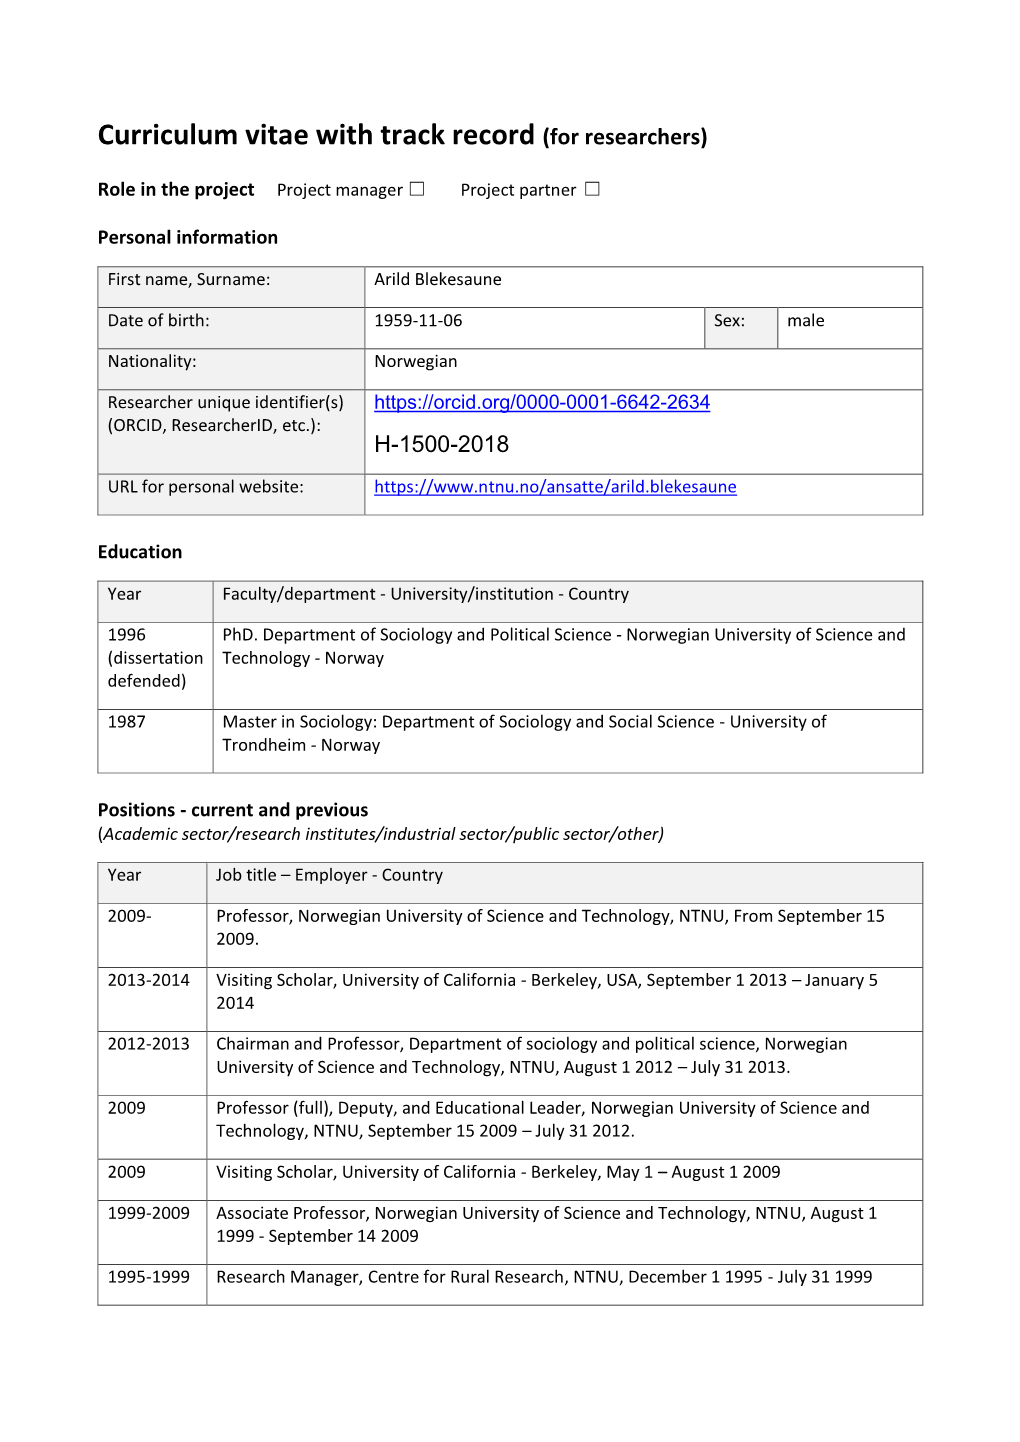 Curriculum Vitae with Track Record (For Researchers)